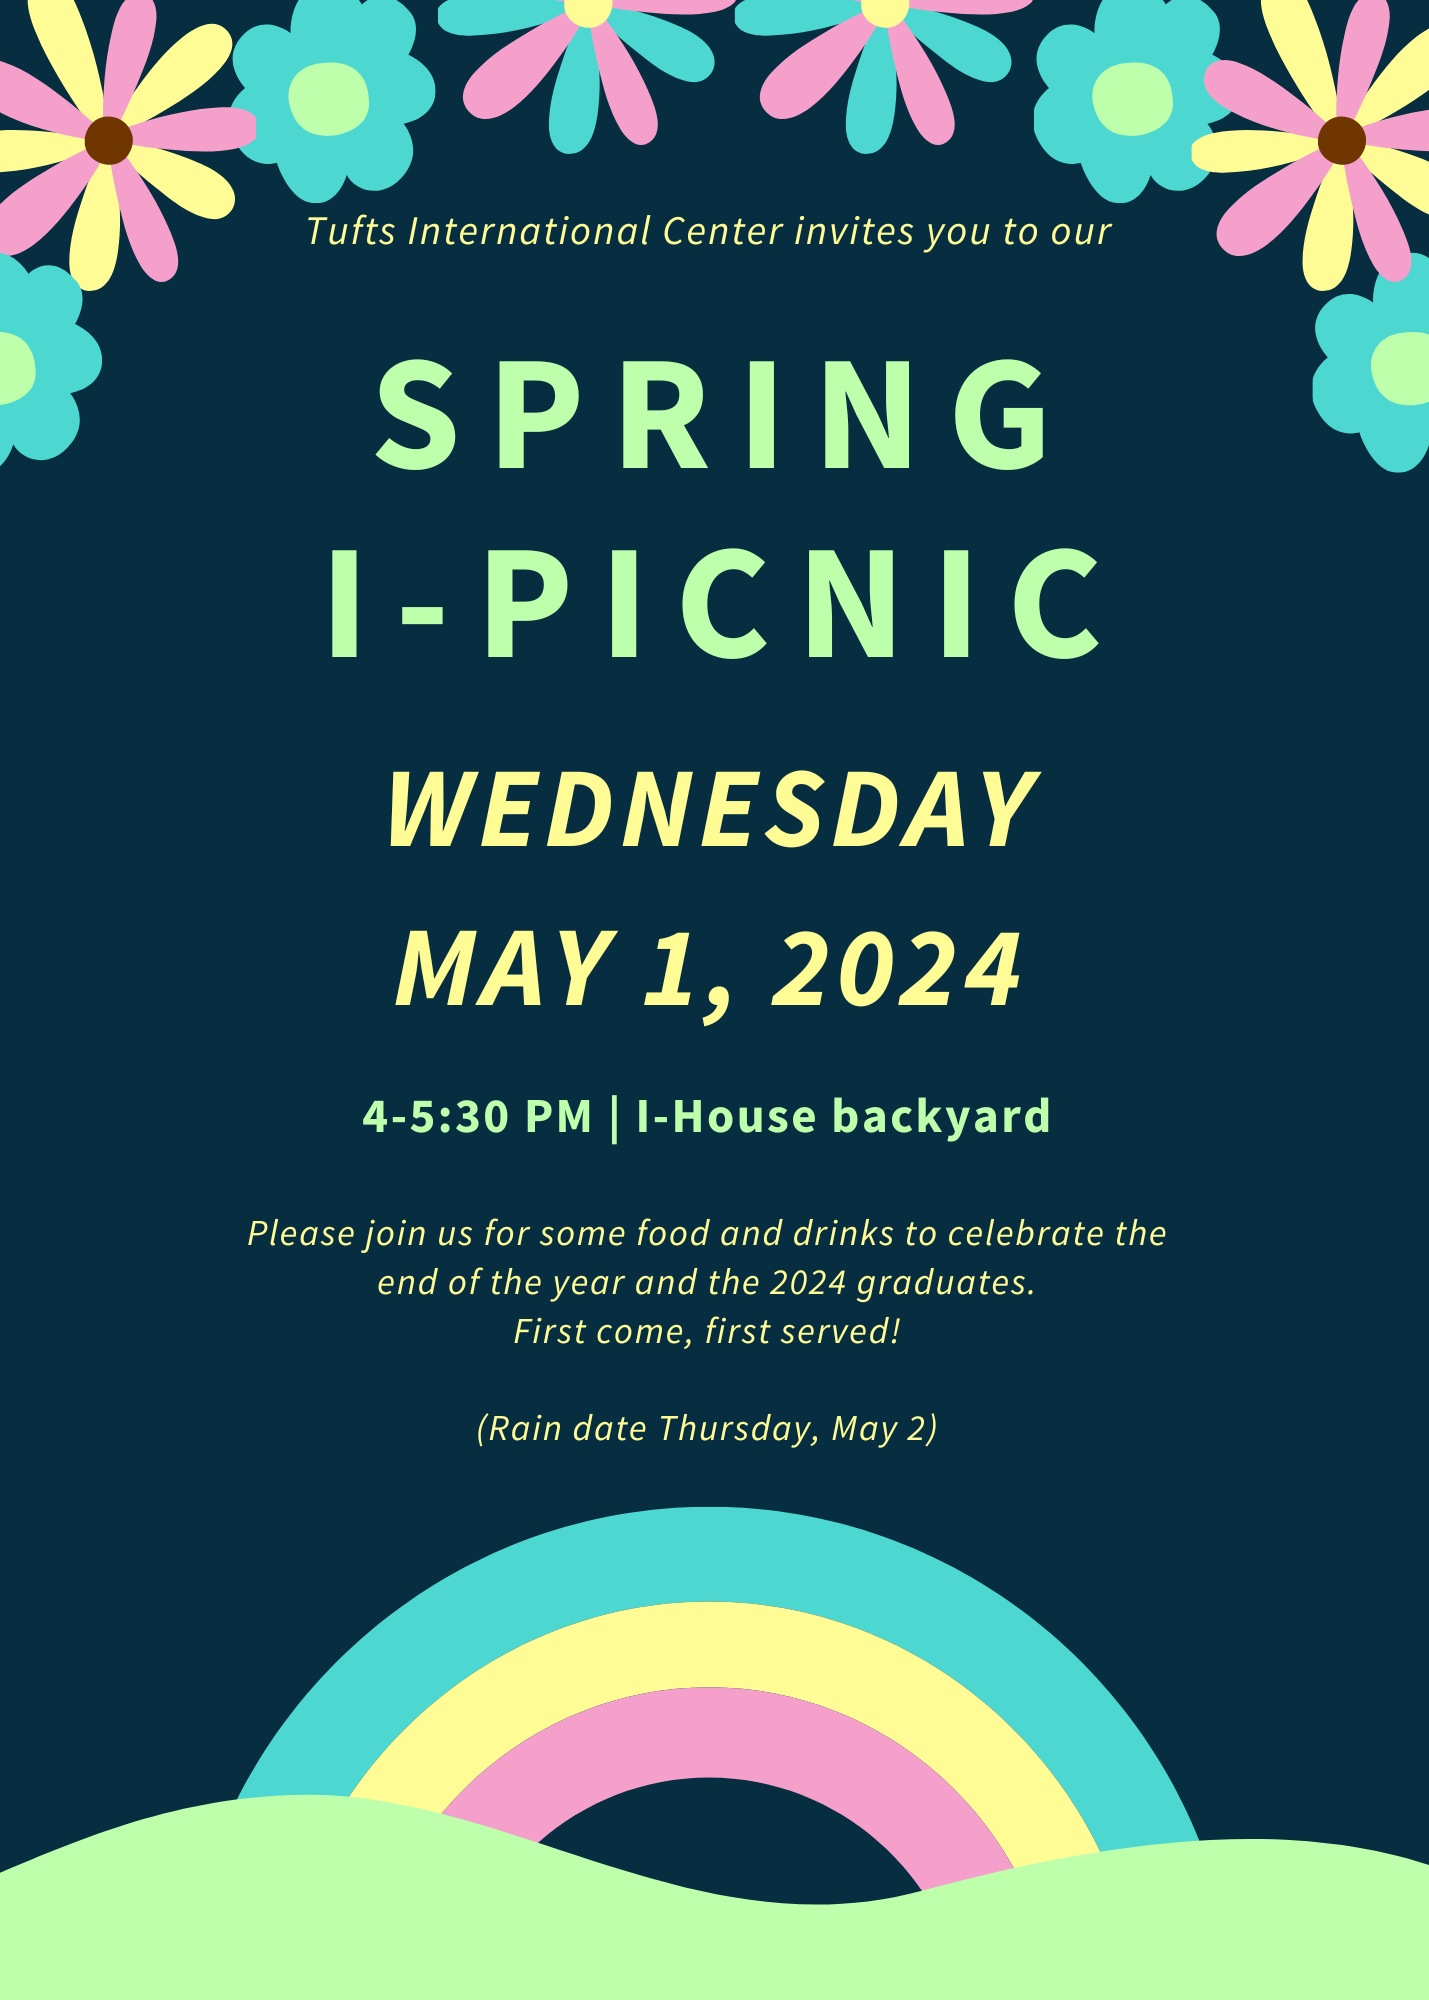 Invitation for spring I-Picnic with flowers and rainbow